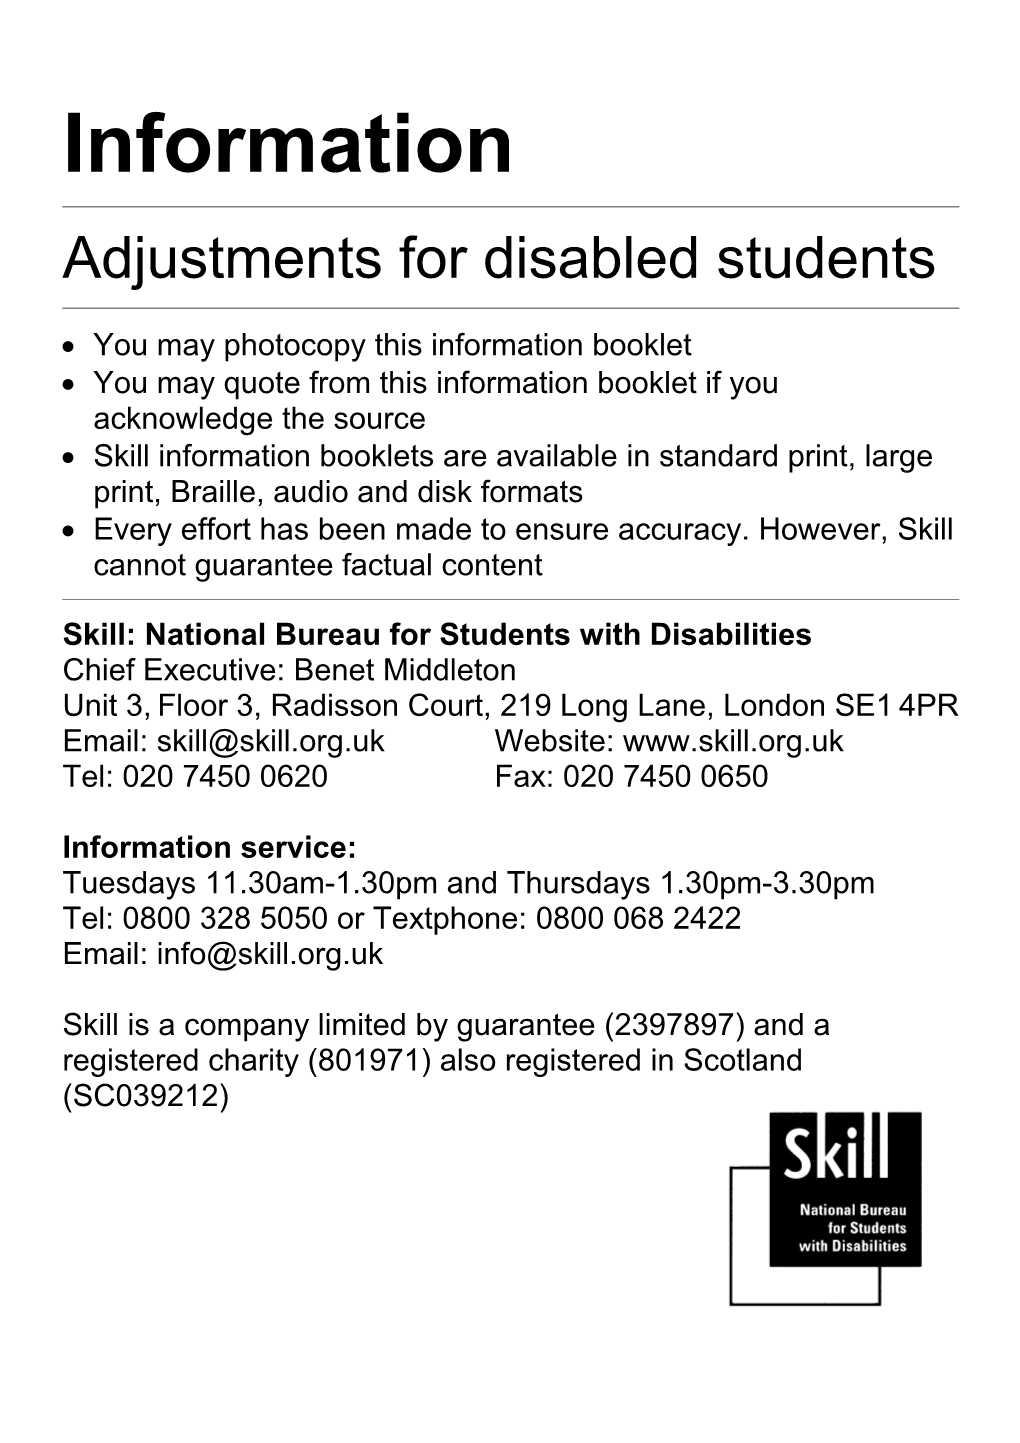 Adjustments for Disabled Students